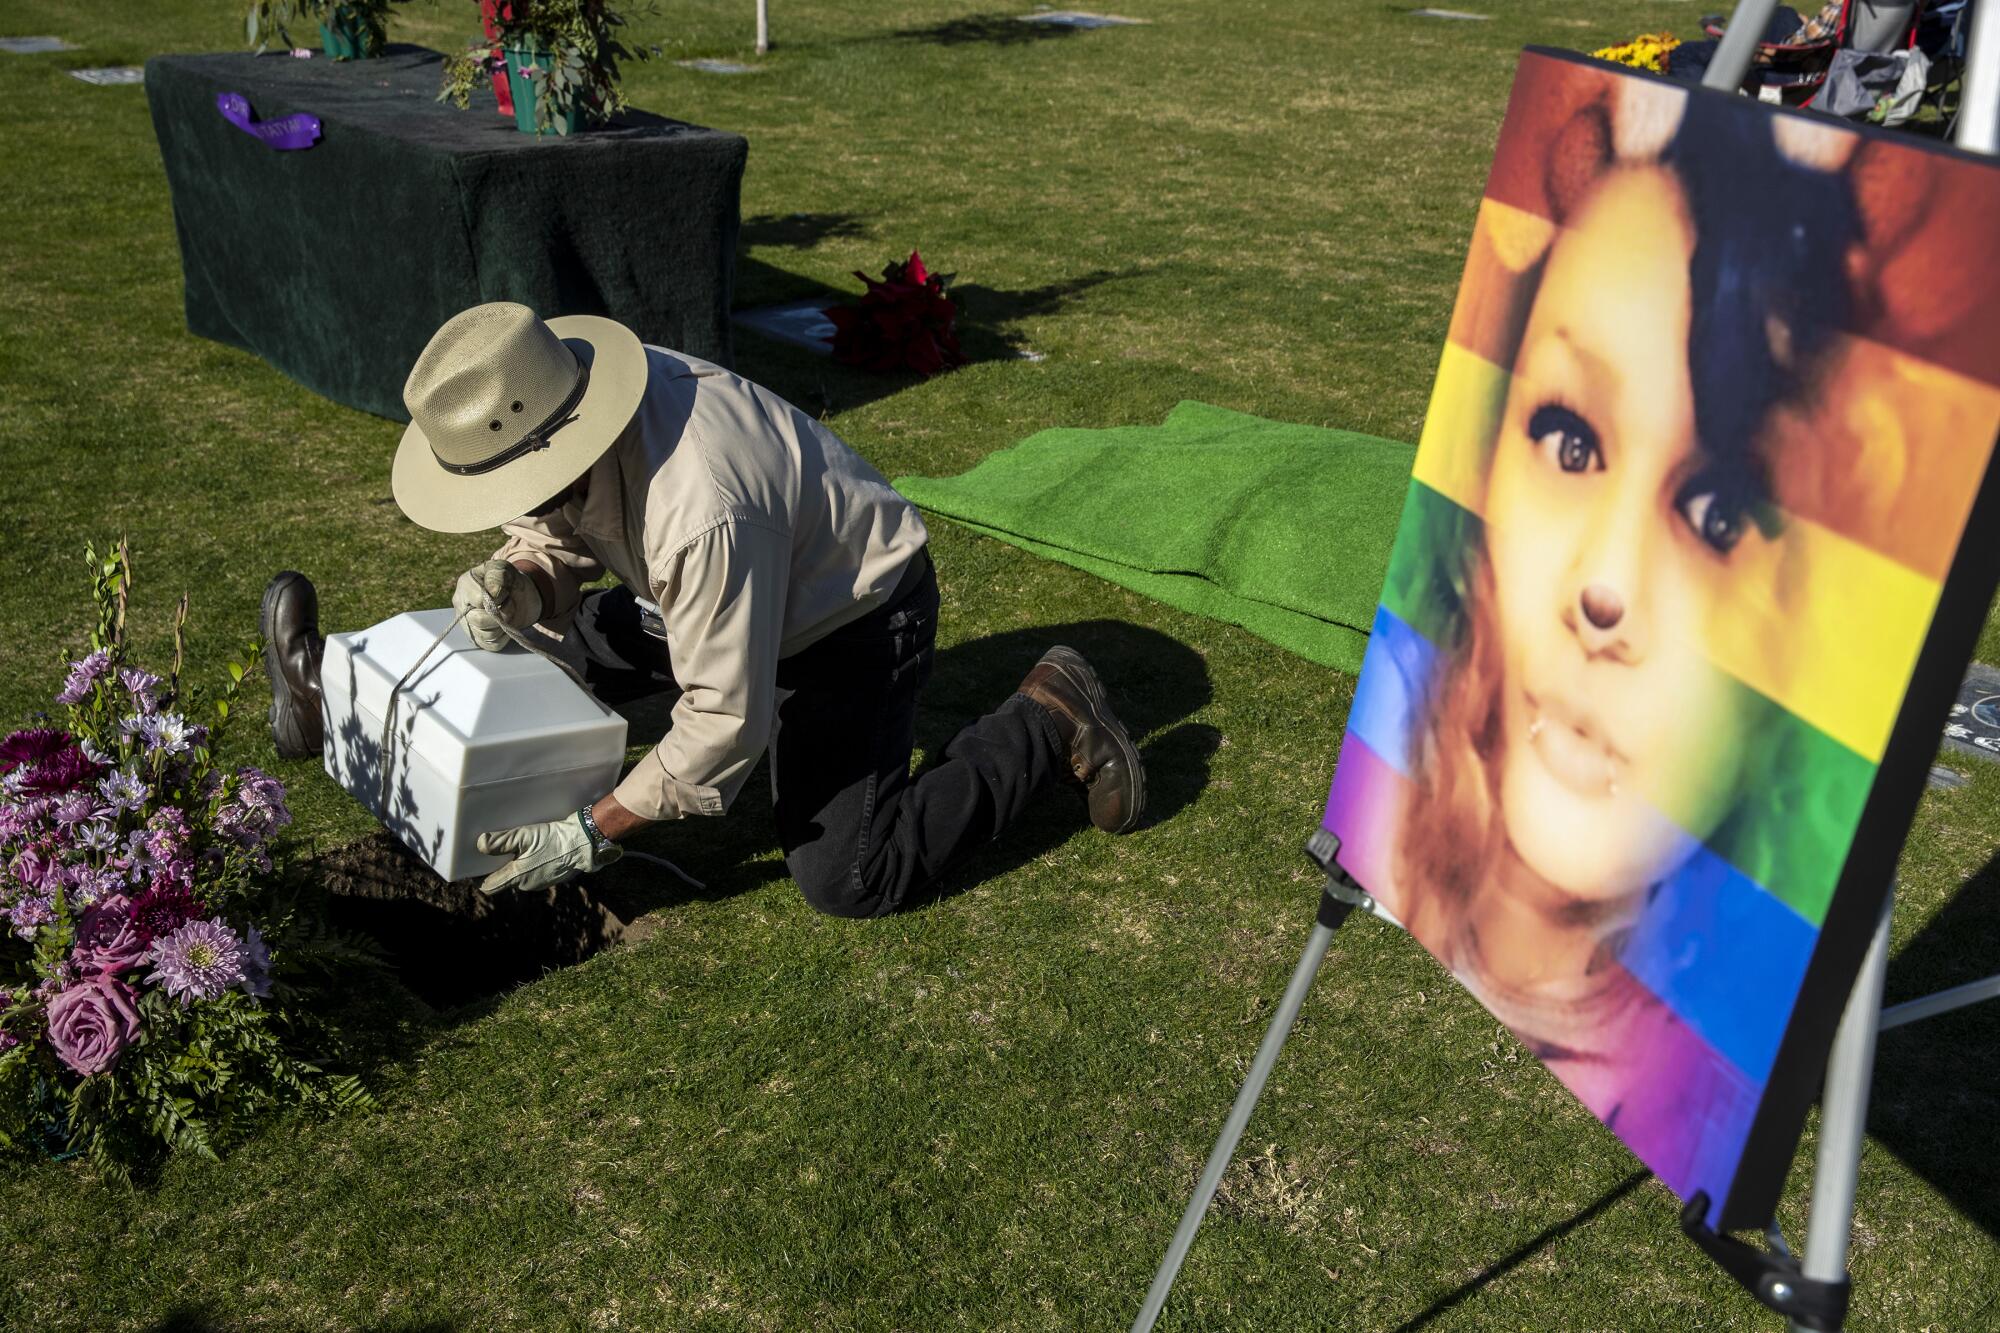 A cemetery worker places an urn in a grave at a memorial service at Desert Memorial Park in Cathedral City.